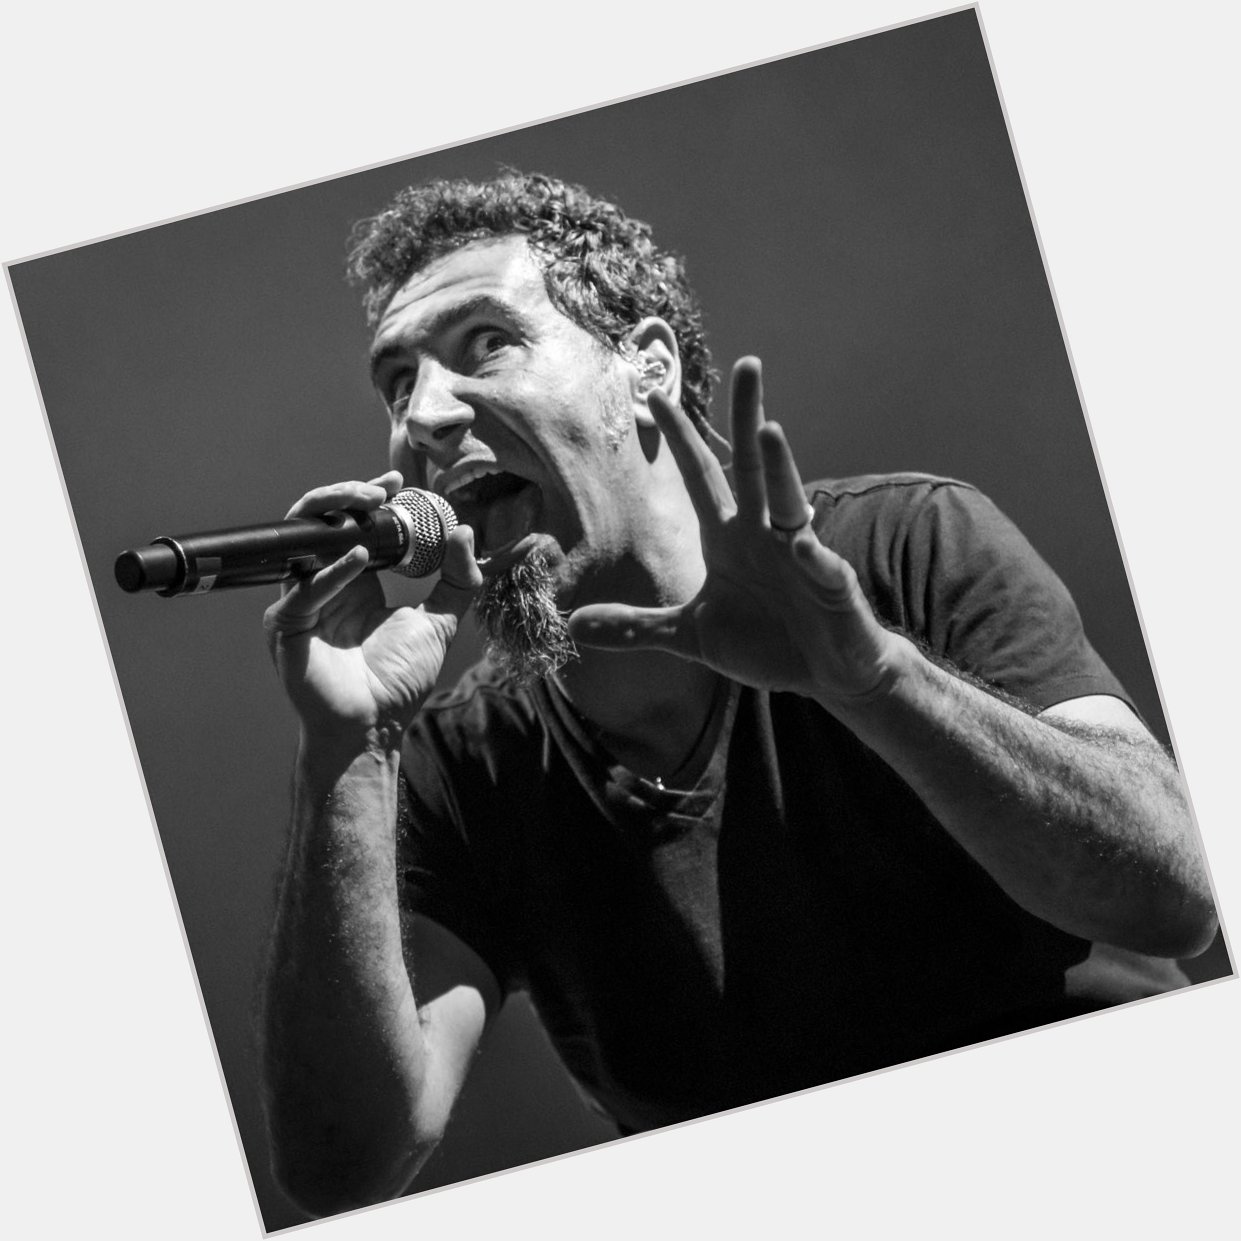 Happy 52nd birthday Serj Tankian, one of the most beautiful voices to ever do music 